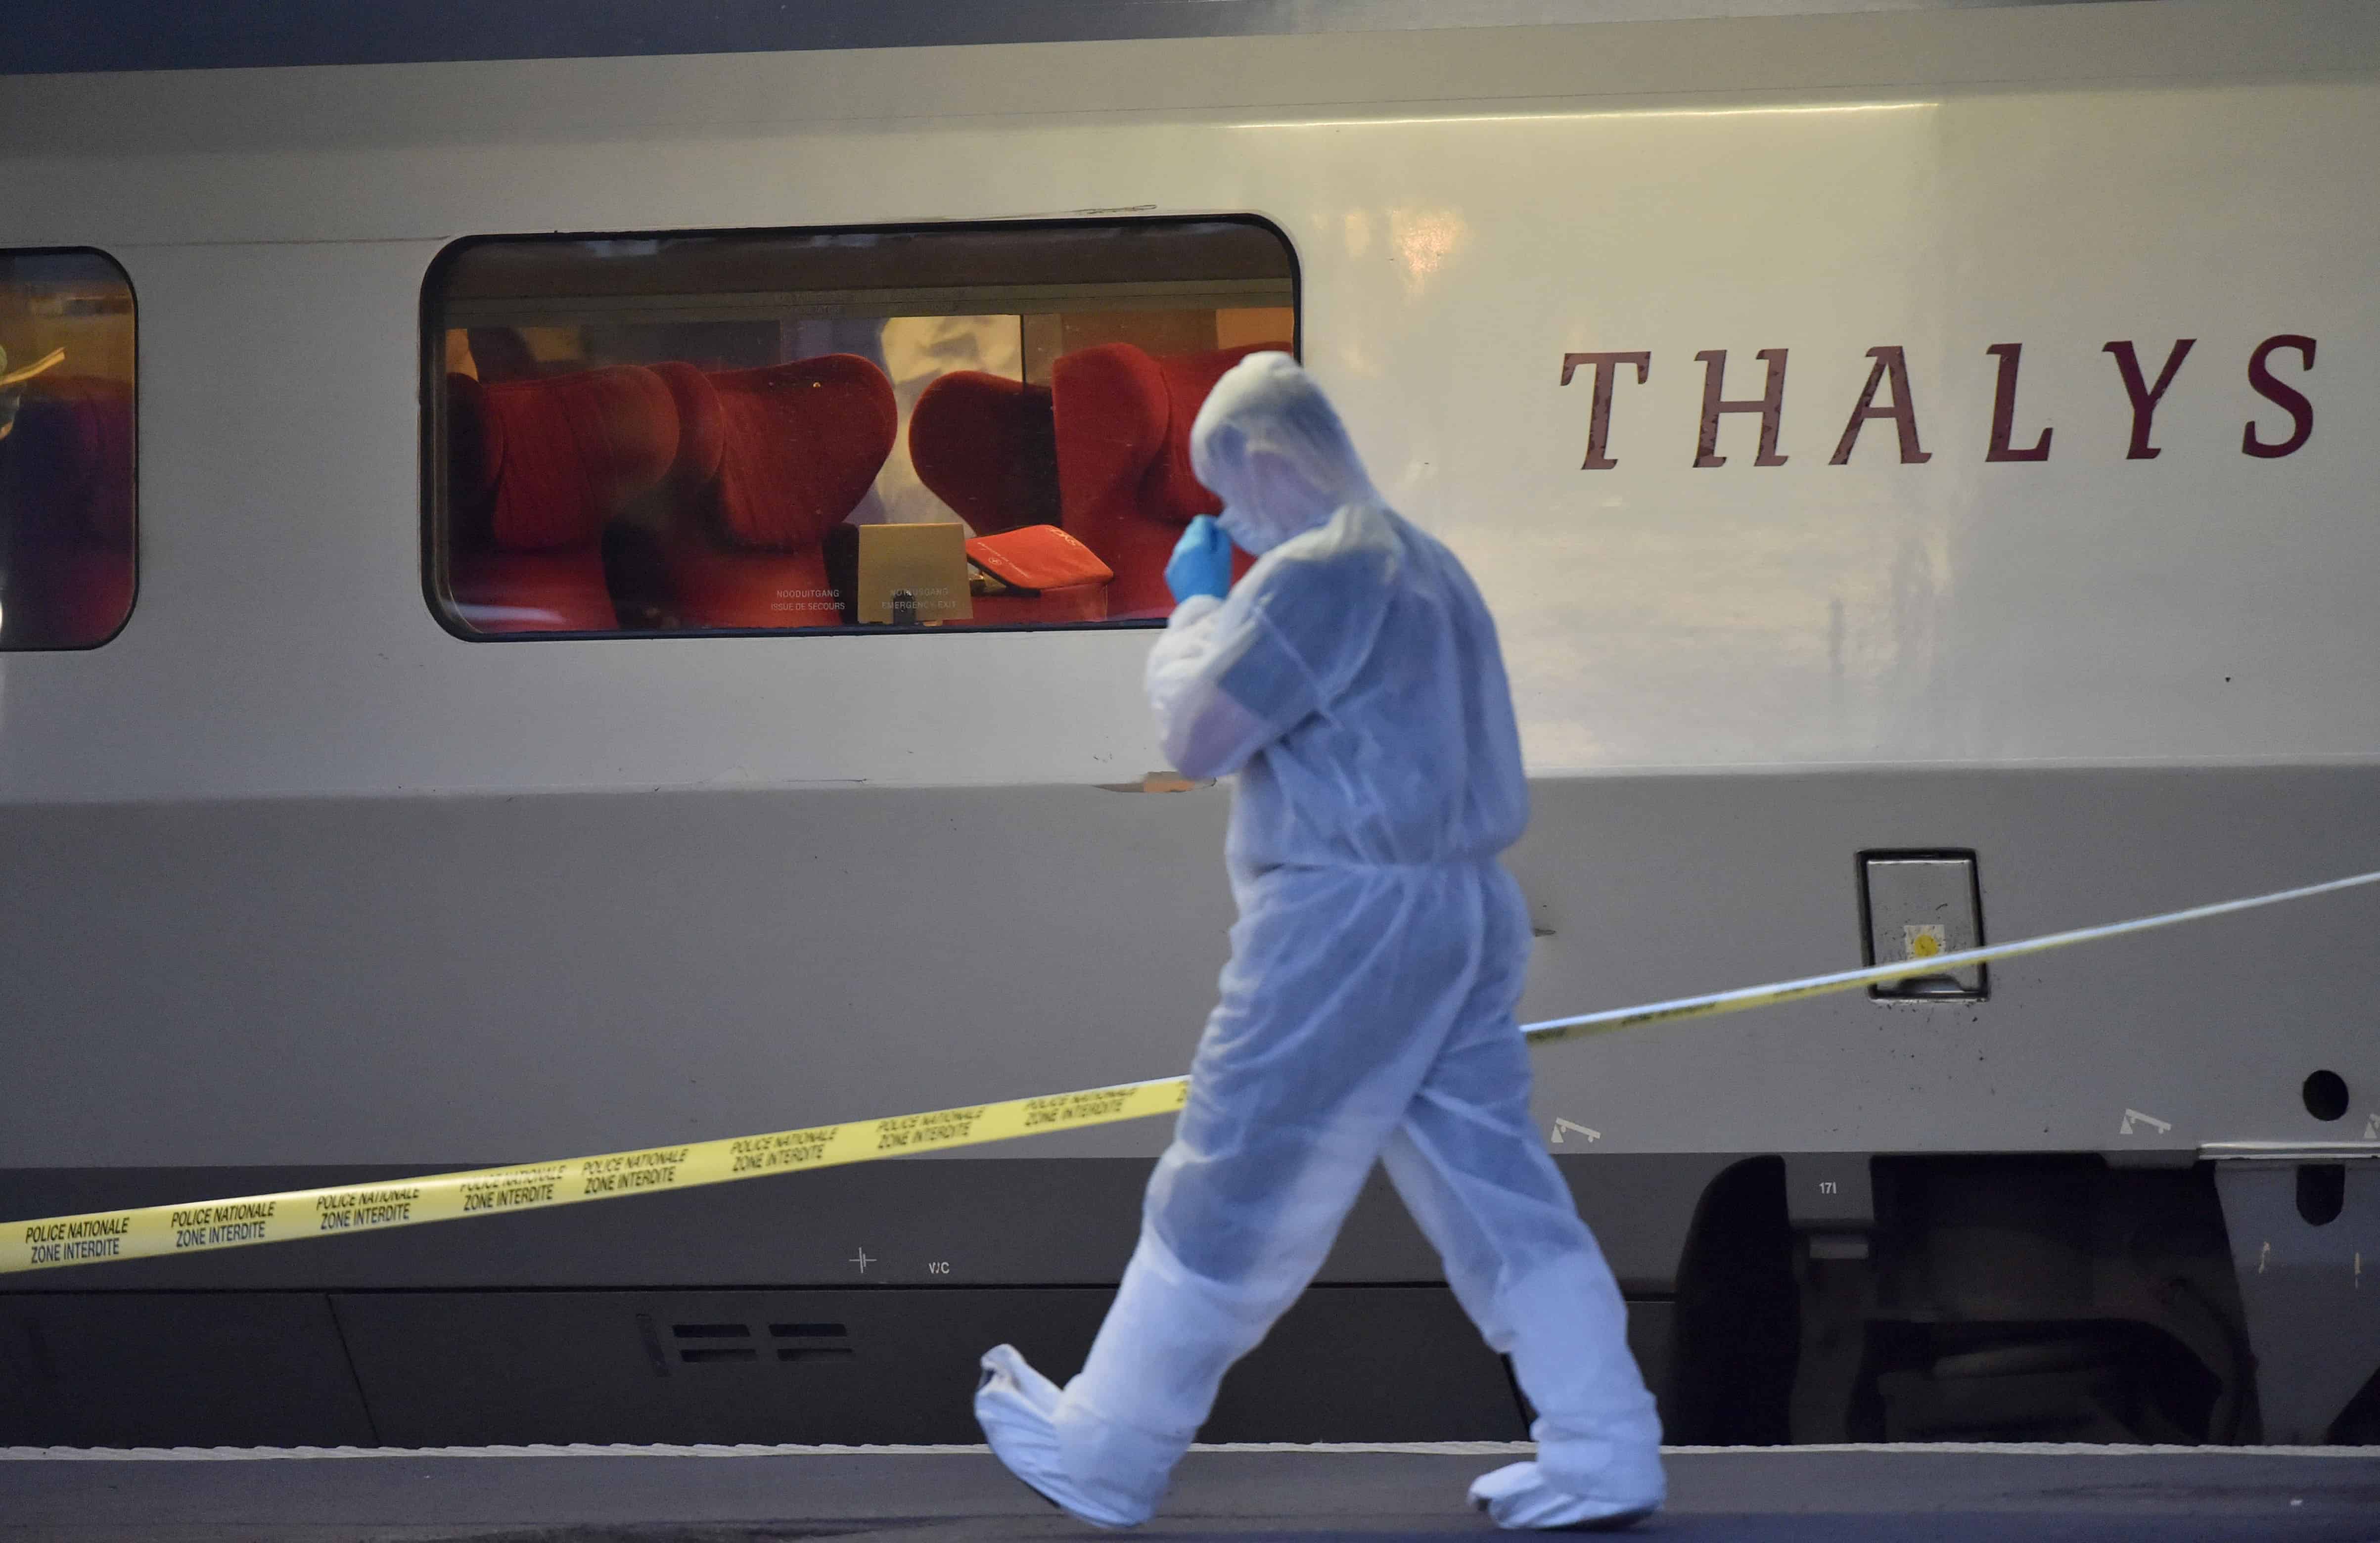 Police officers walk on a platform next to a Thalys train.